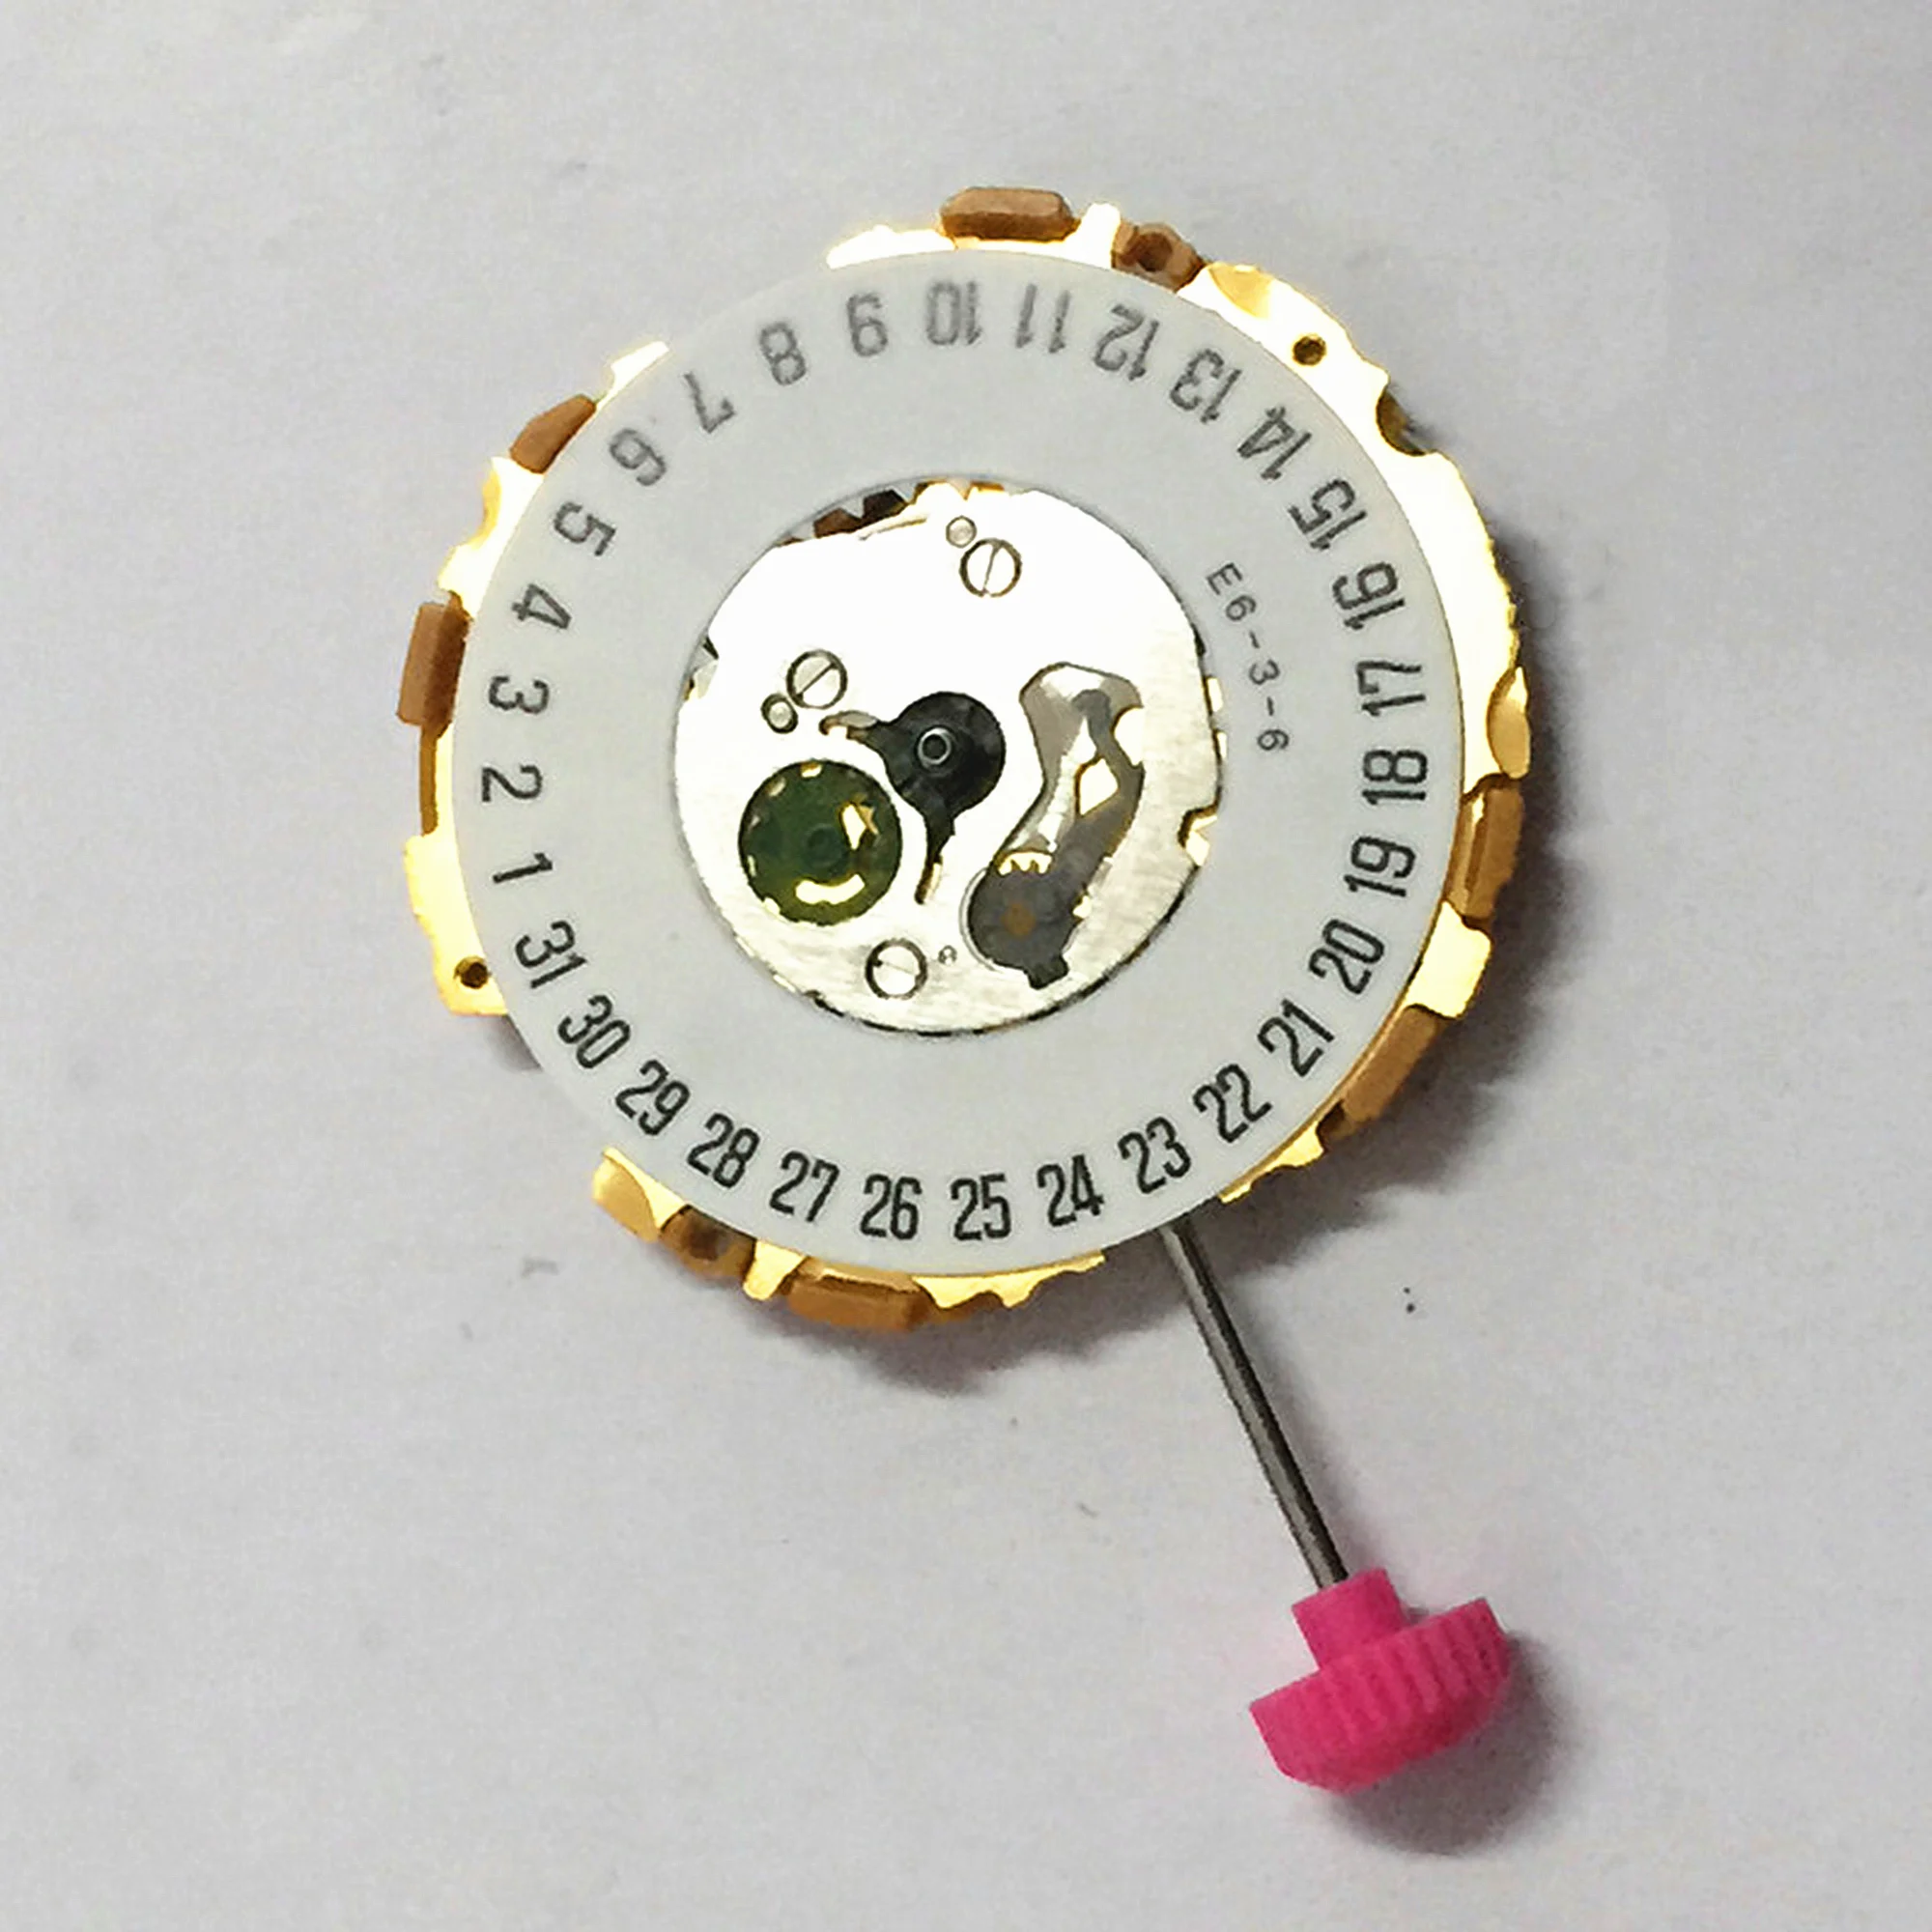 Free Shipping NEW Japan Miyota 9U13 Quartz Watch Movement Date at 3 6 Without battery Replace Repair | Наручные часы